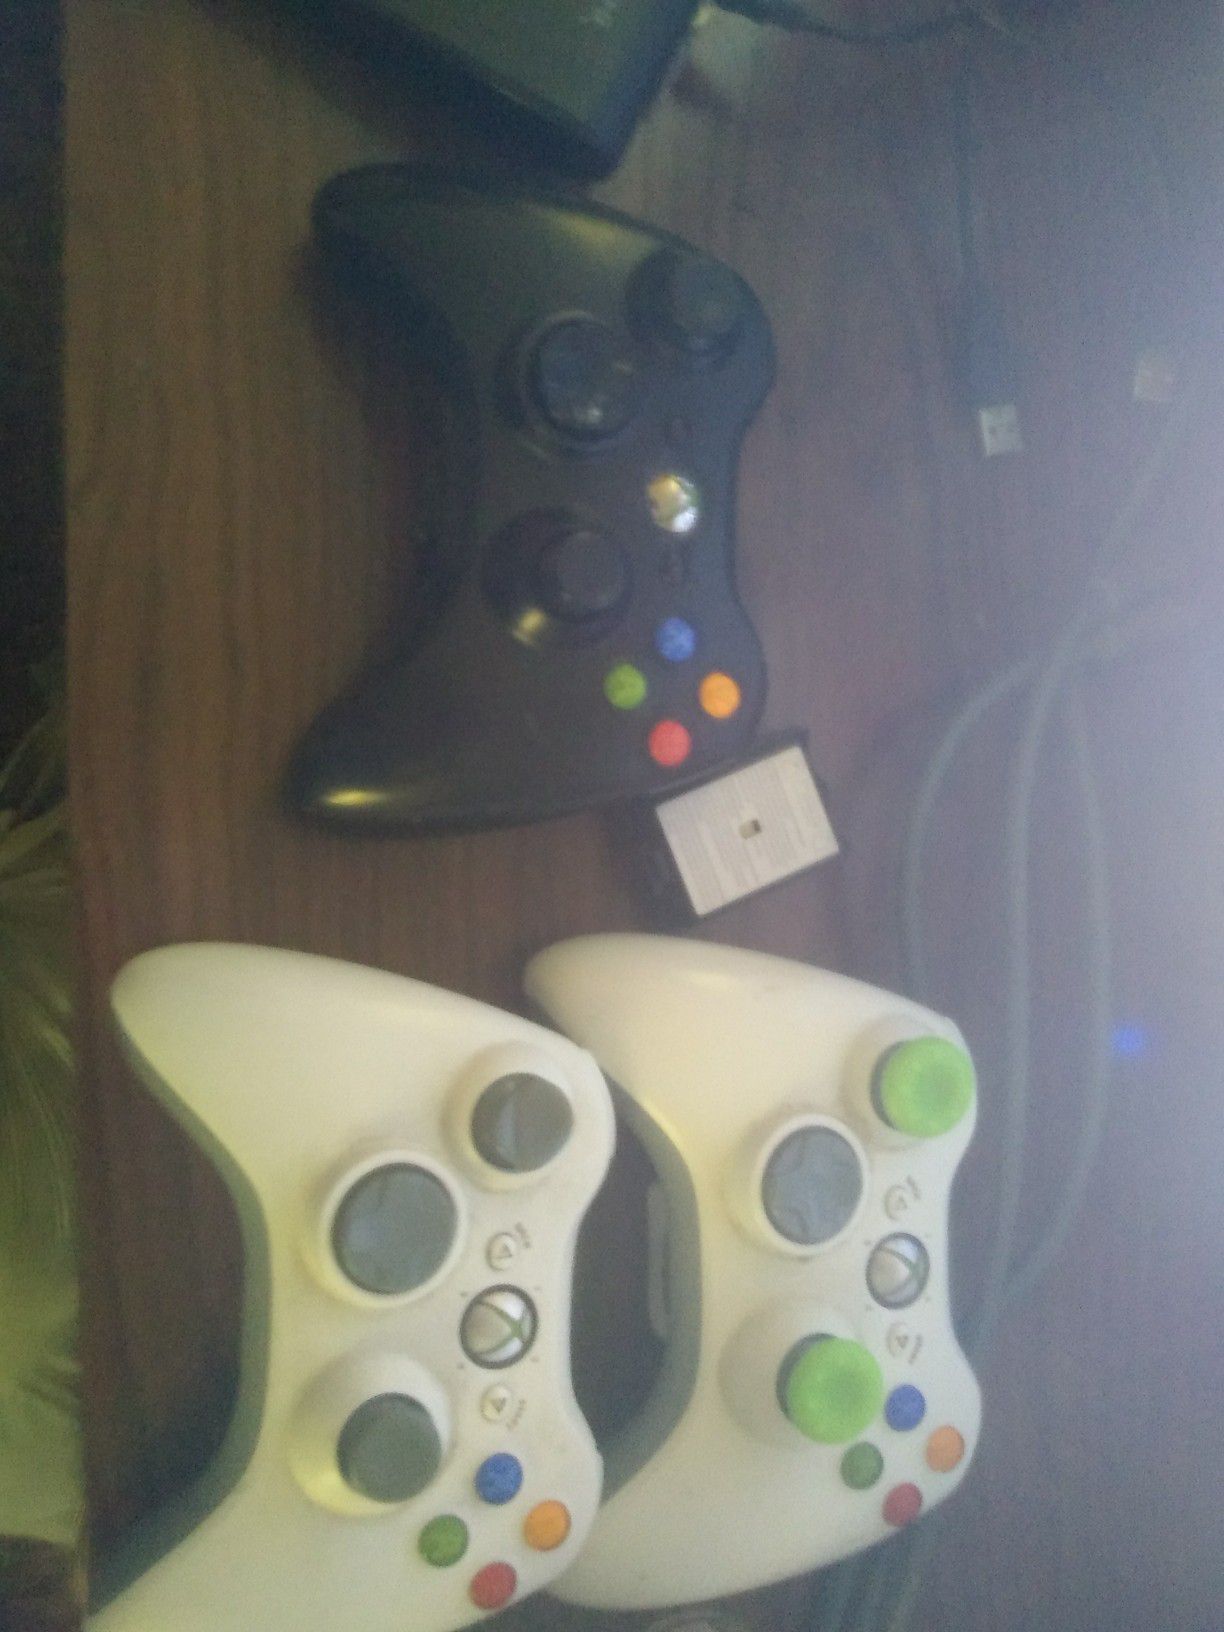 3 Xbox 360 controllers + Hard Drive + Games + Cables + wifi